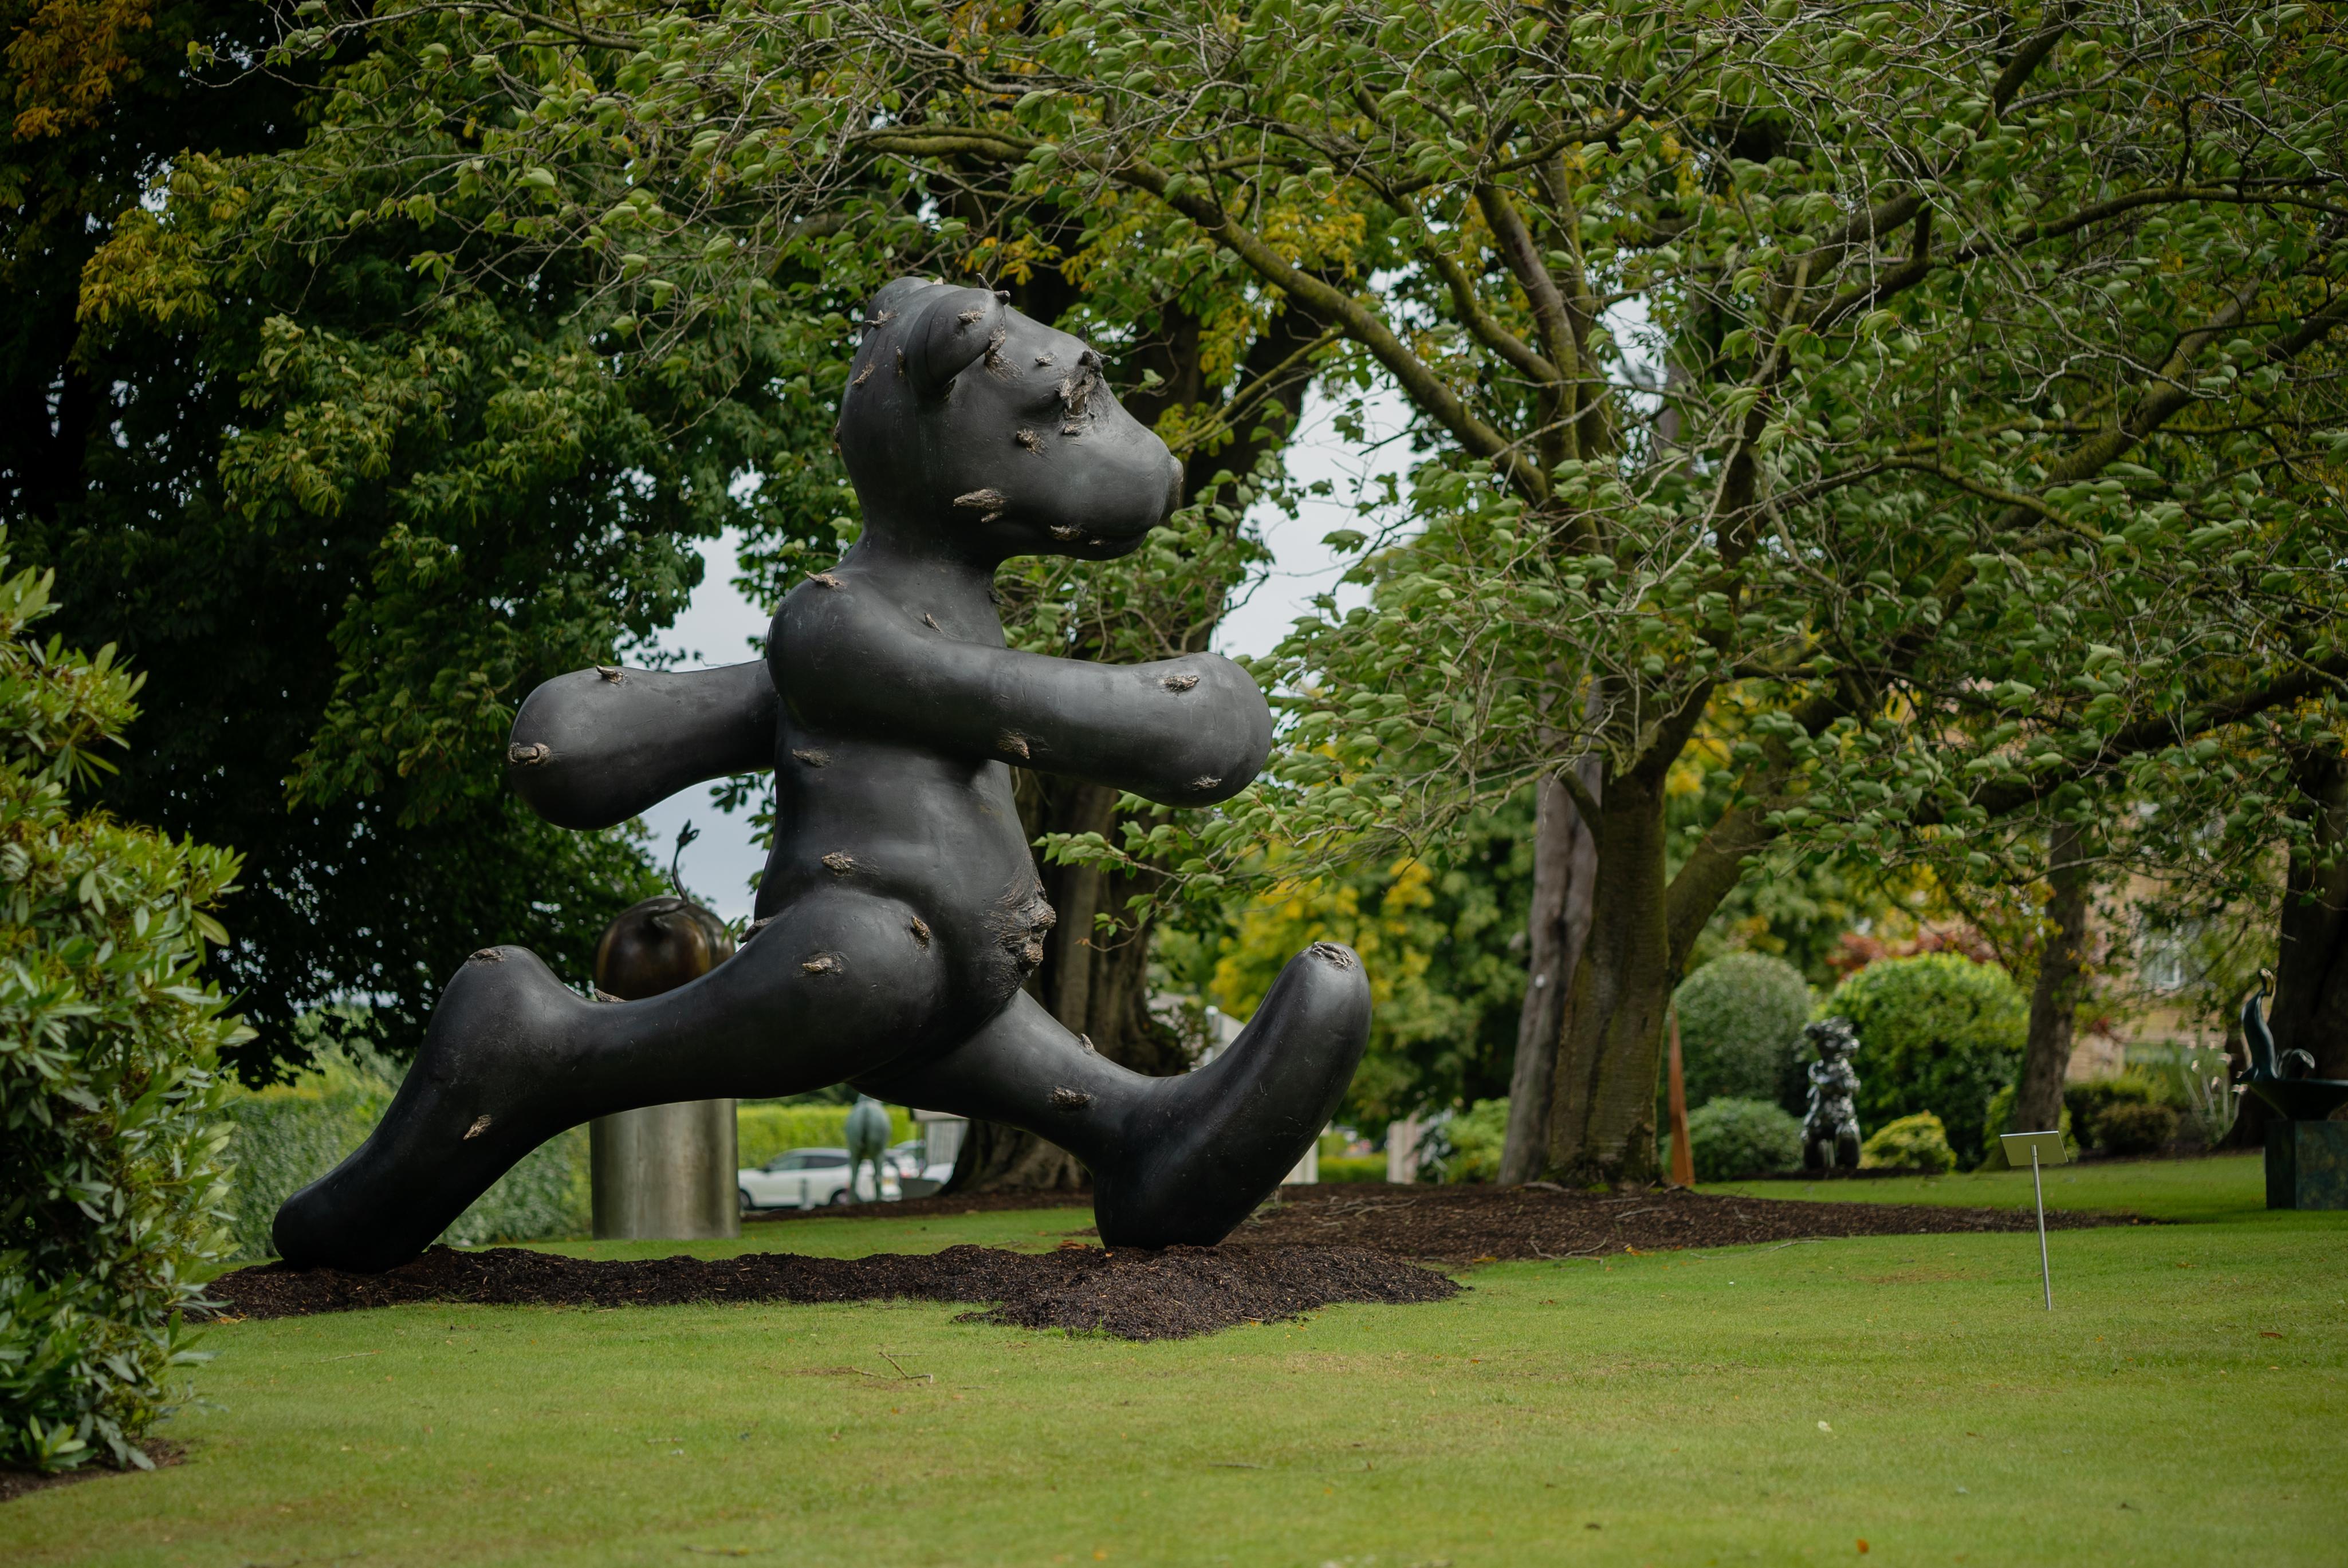 This piece is entitled Larger Than Life as it stands at 4 metres tall. The bear is a running theme in Patrick's work and it references his childhood teddy bear. Patrick wants his audience to reflect on the importance of the sanctity on childhood by